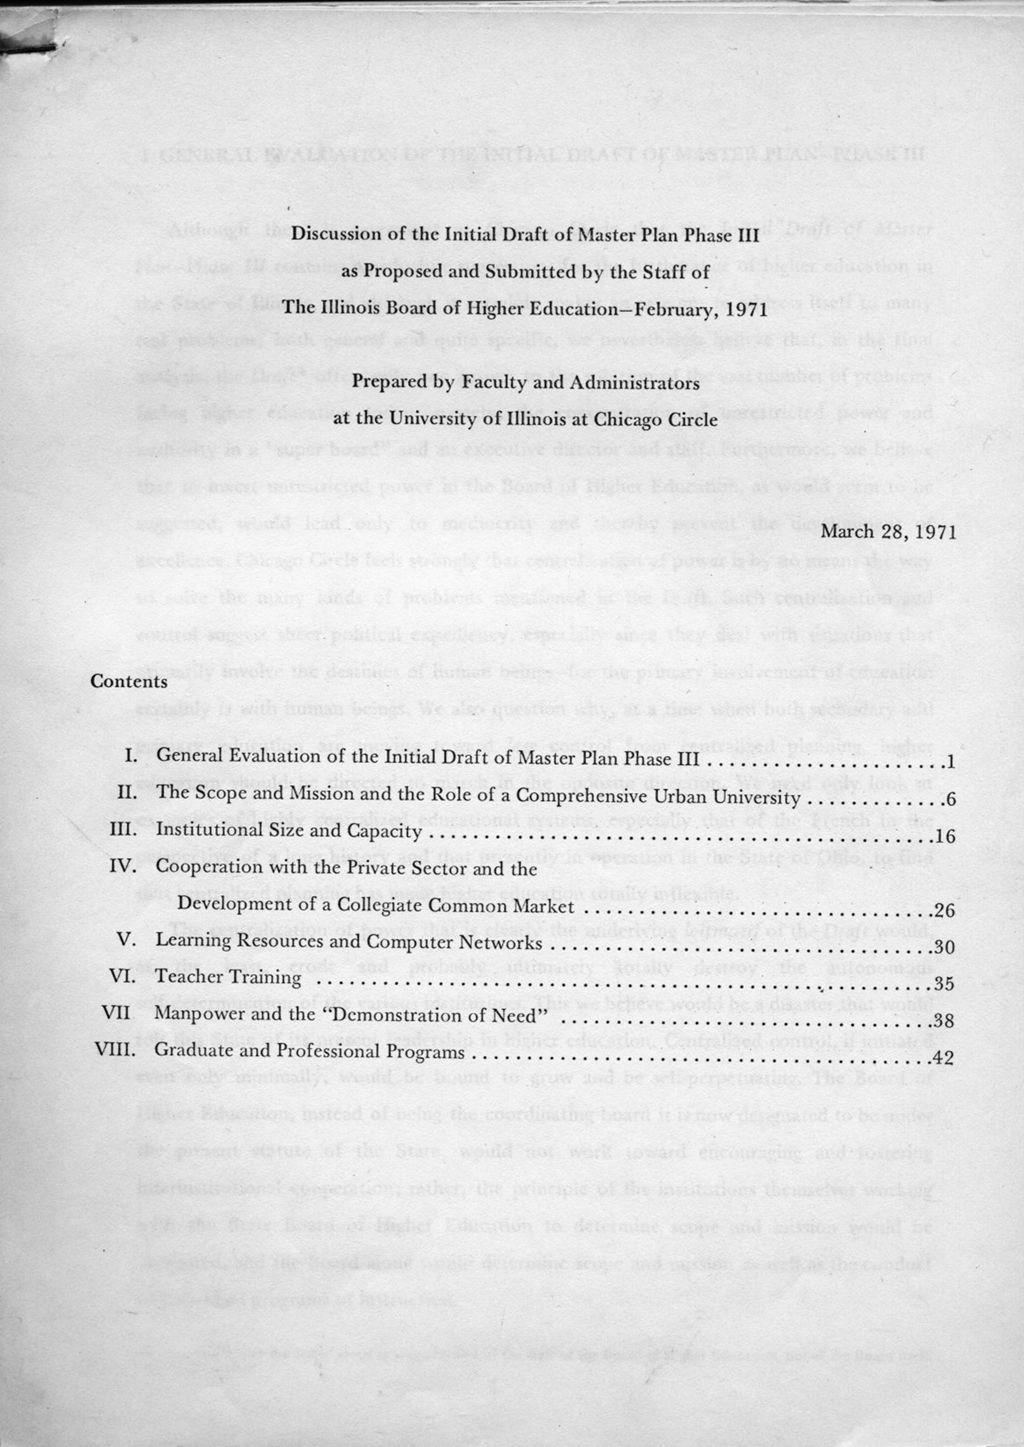 Discussion of the Initial Draft of the Master Plan Phase III as Proposed and Submitted by the Staff of The Illinois Board of Higher Education - February, 1971